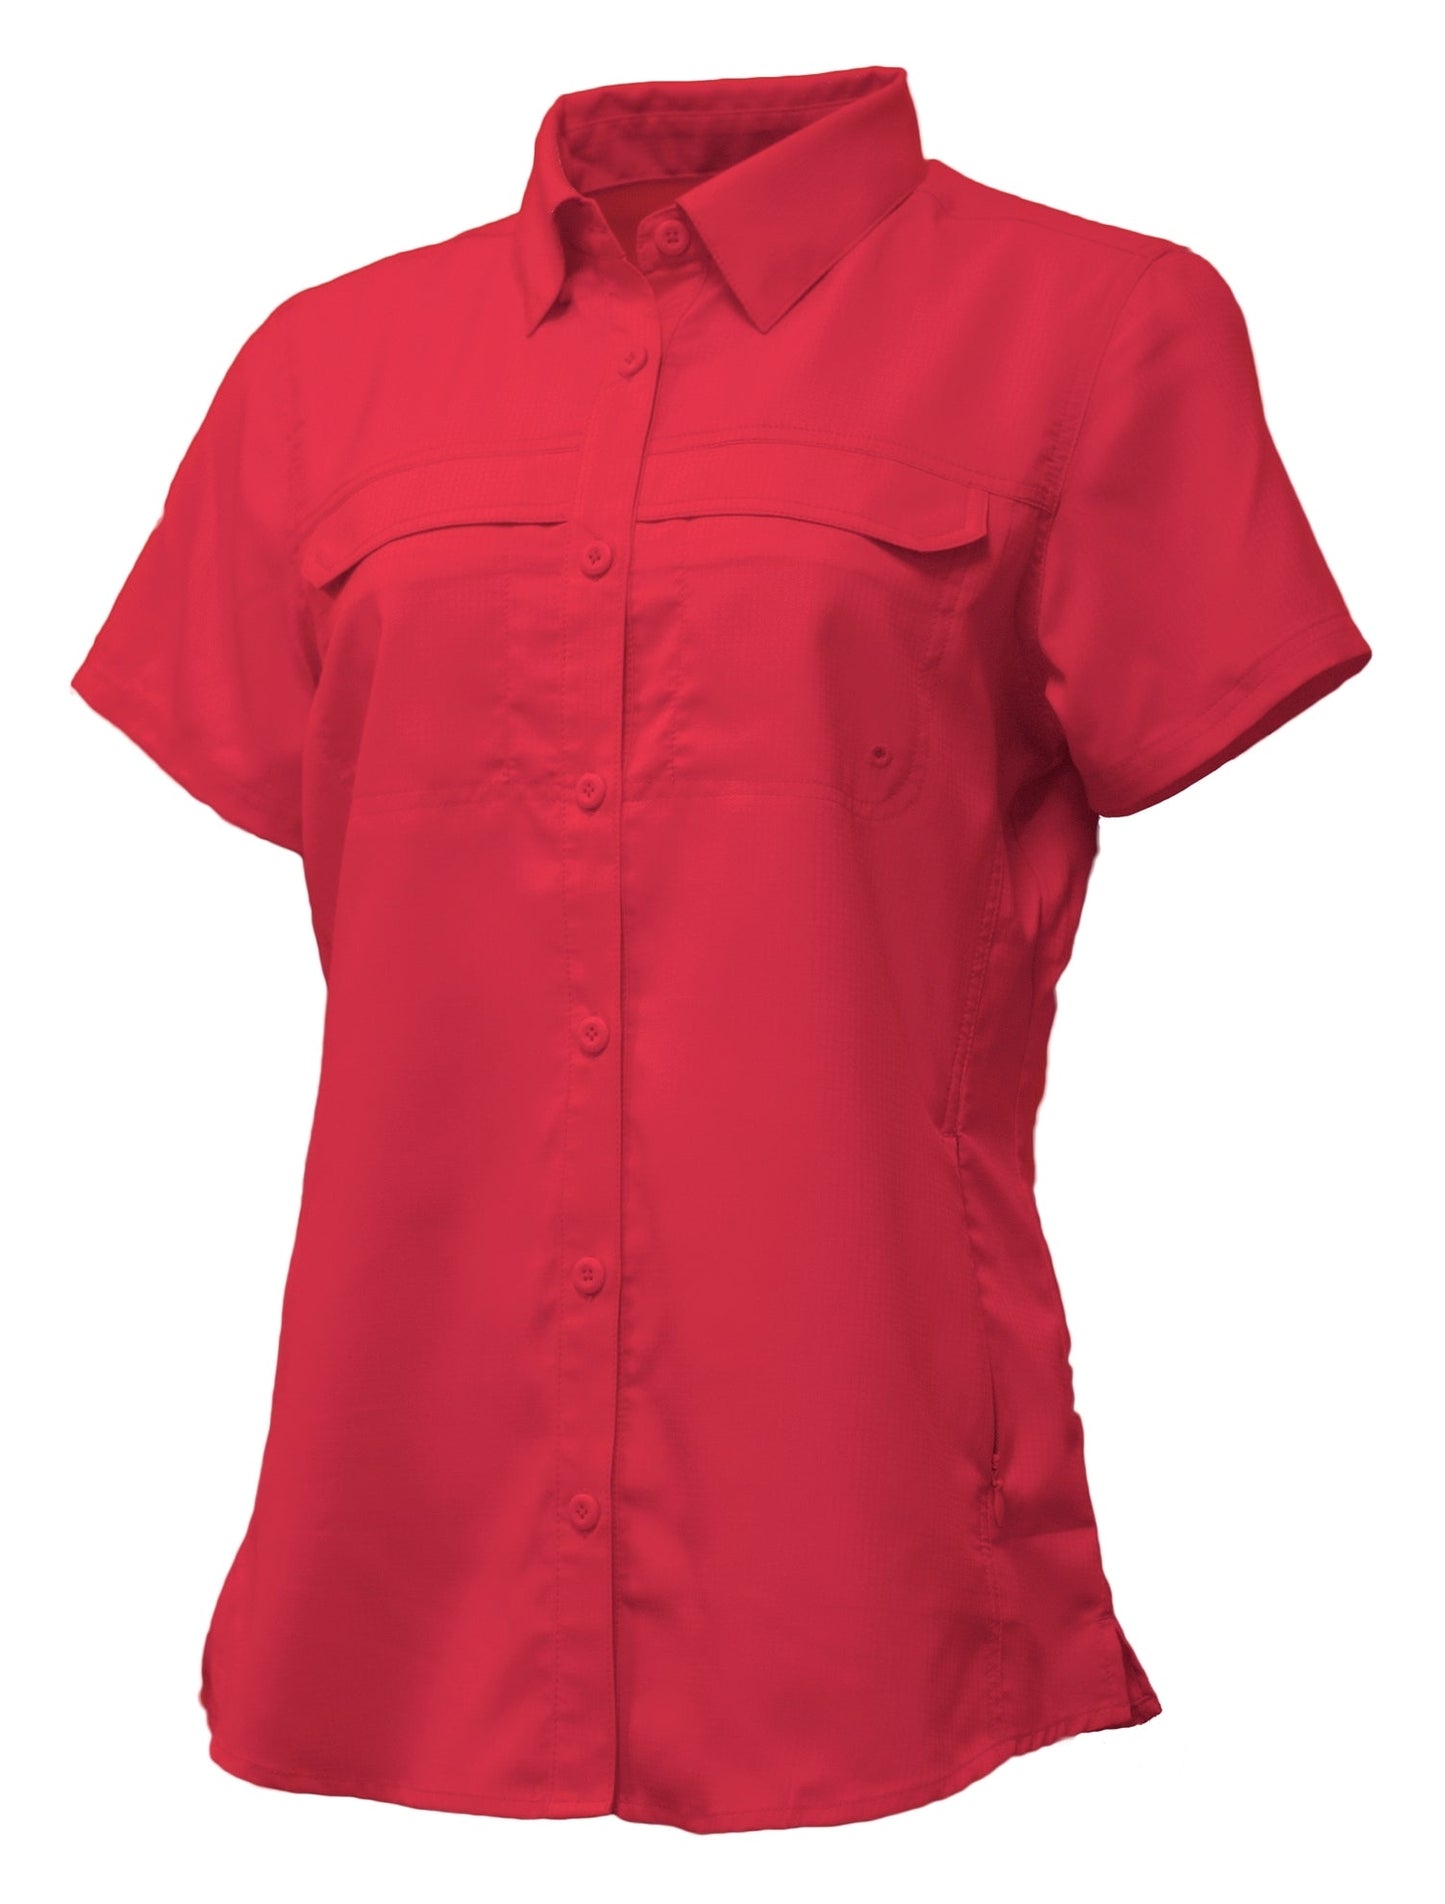 BAW® Women's Short Sleeve - Coral